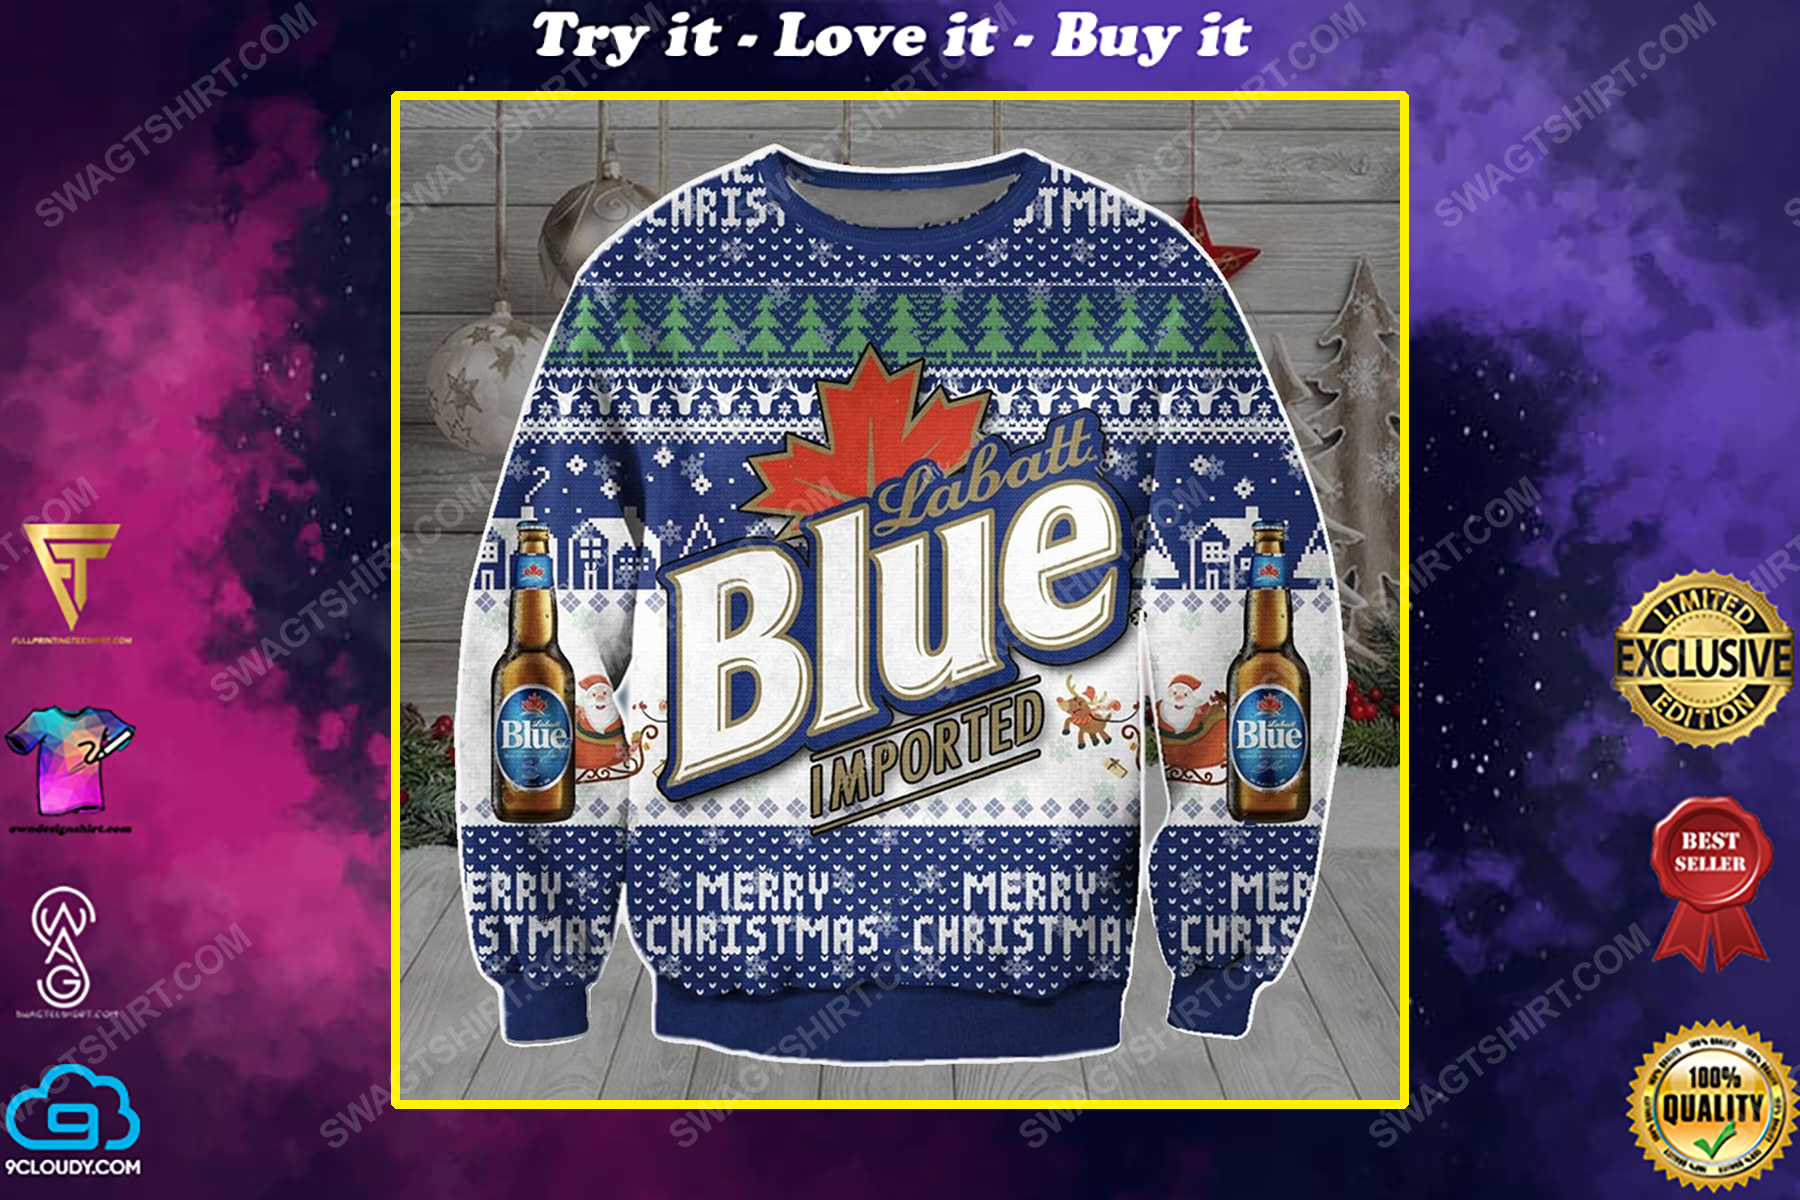 Labatt blue imported ugly christmas sweater